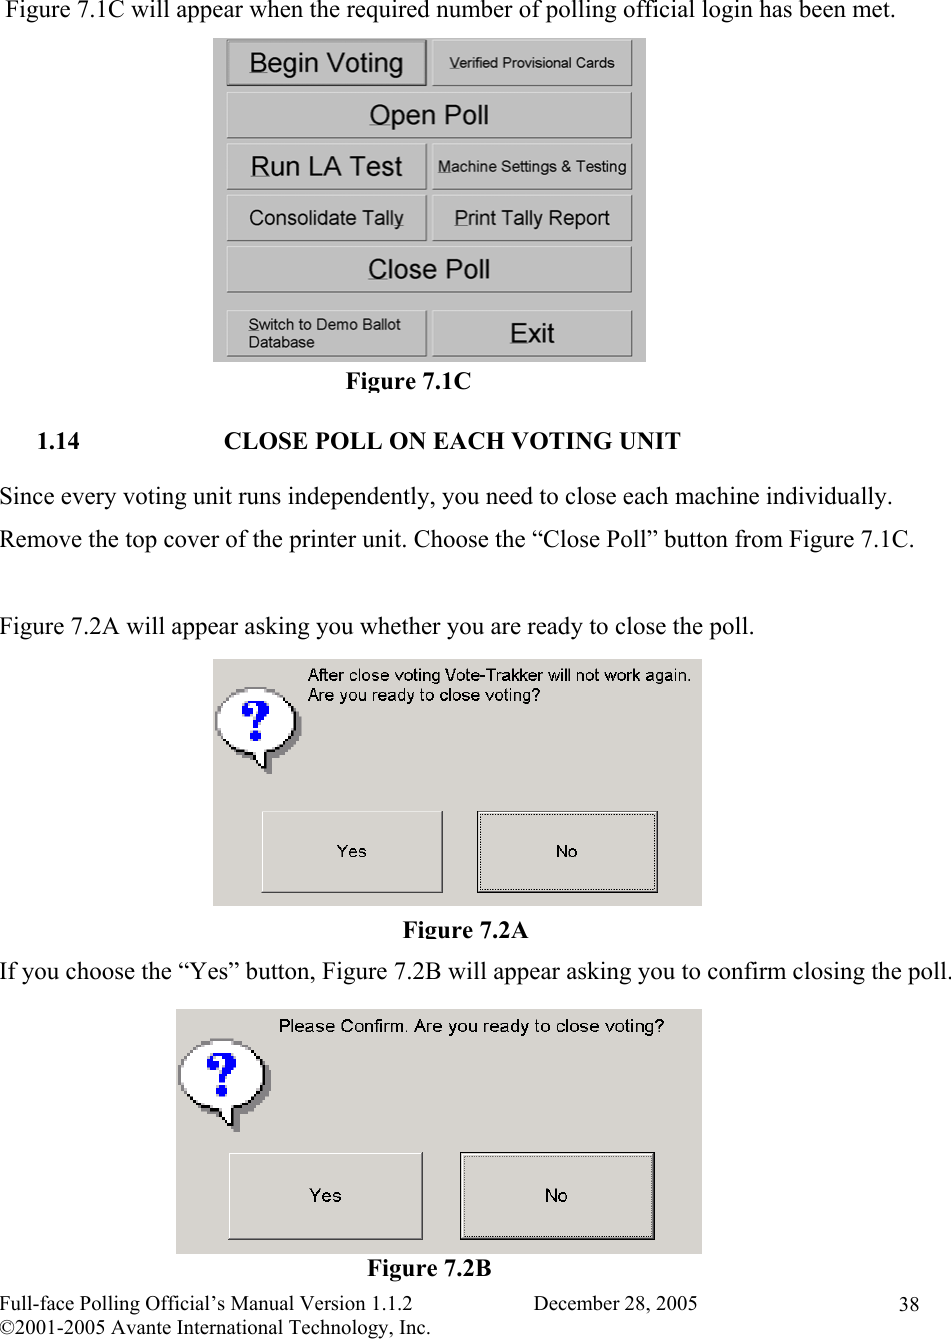    Full-face Polling Official’s Manual Version 1.1.2                       December 28, 2005 ©2001-2005 Avante International Technology, Inc.   38  Figure 7.1C will appear when the required number of polling official login has been met.          1.14  CLOSE POLL ON EACH VOTING UNIT Since every voting unit runs independently, you need to close each machine individually.  Remove the top cover of the printer unit. Choose the “Close Poll” button from Figure 7.1C.  Figure 7.2A will appear asking you whether you are ready to close the poll.        If you choose the “Yes” button, Figure 7.2B will appear asking you to confirm closing the poll.        Figure 7.2AFigure 7.2B Figure 7.1C